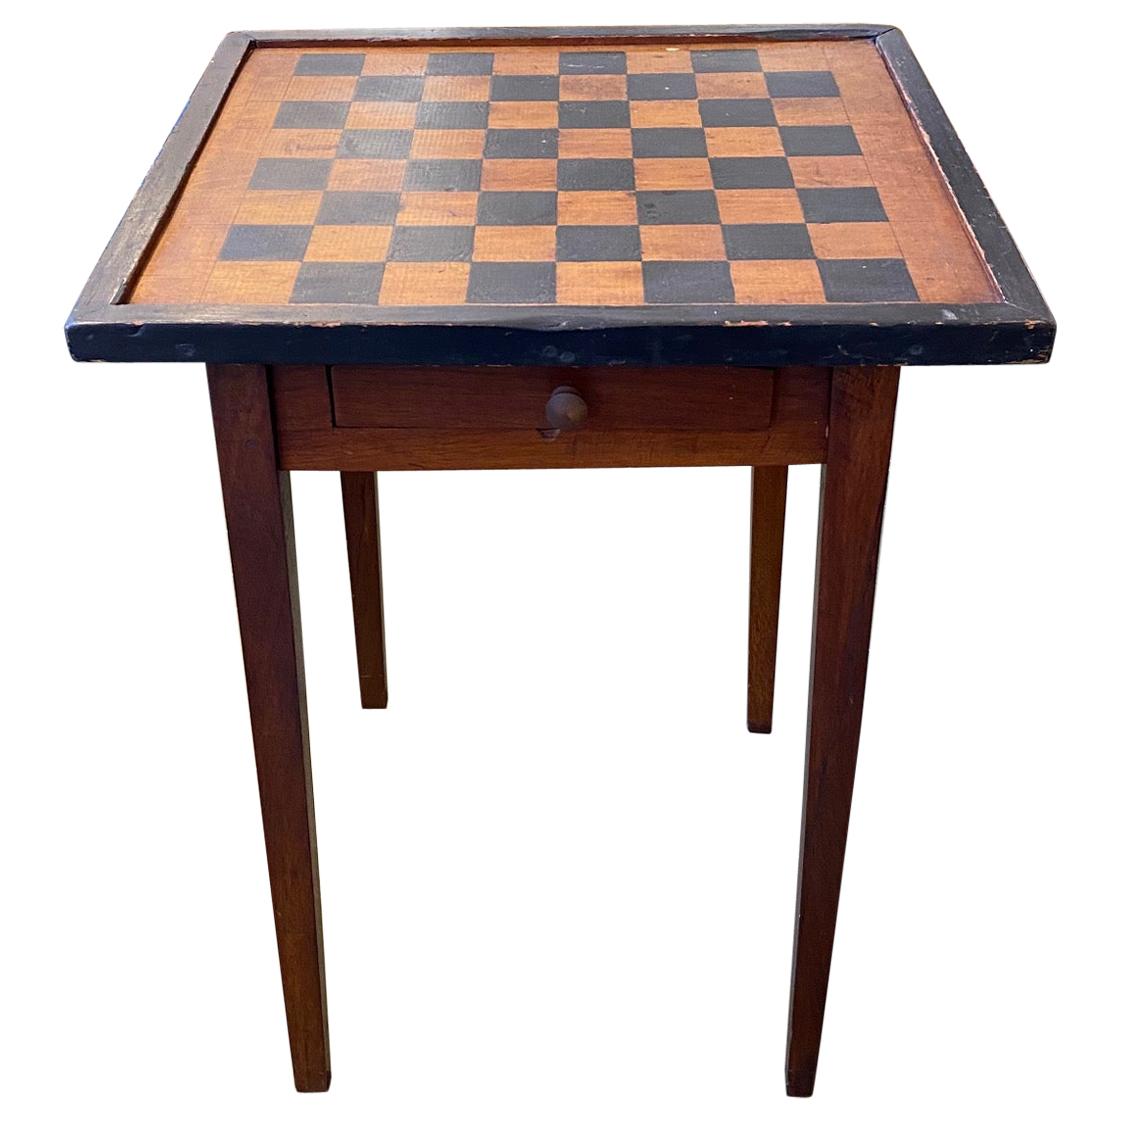 19th Century Rustic Painted Game Table